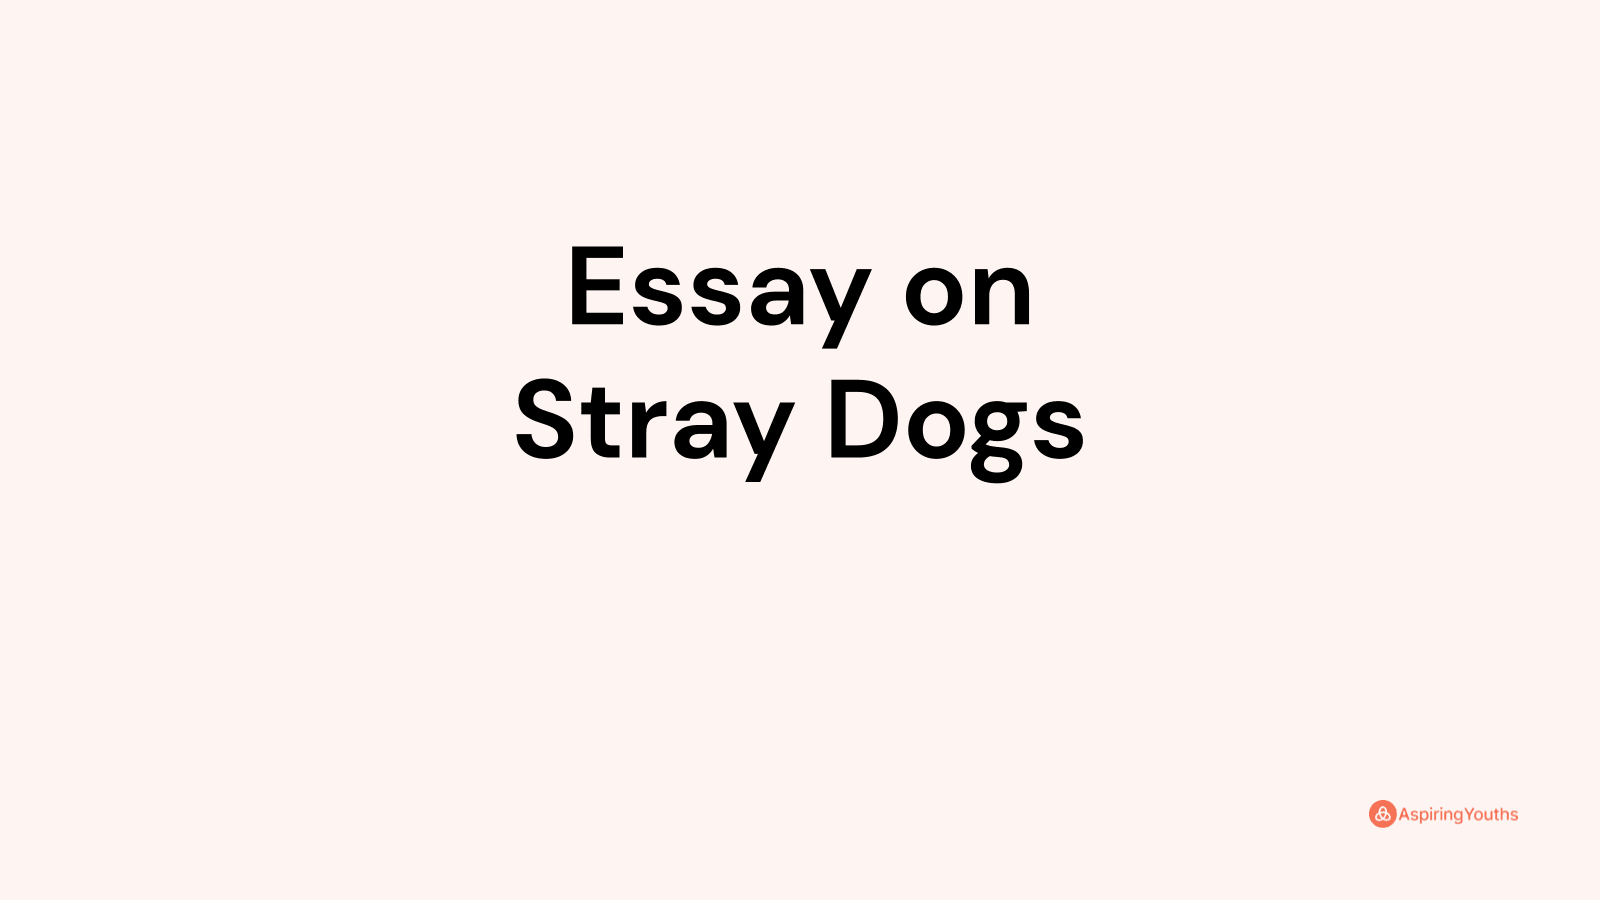 write an essay on stray dogs